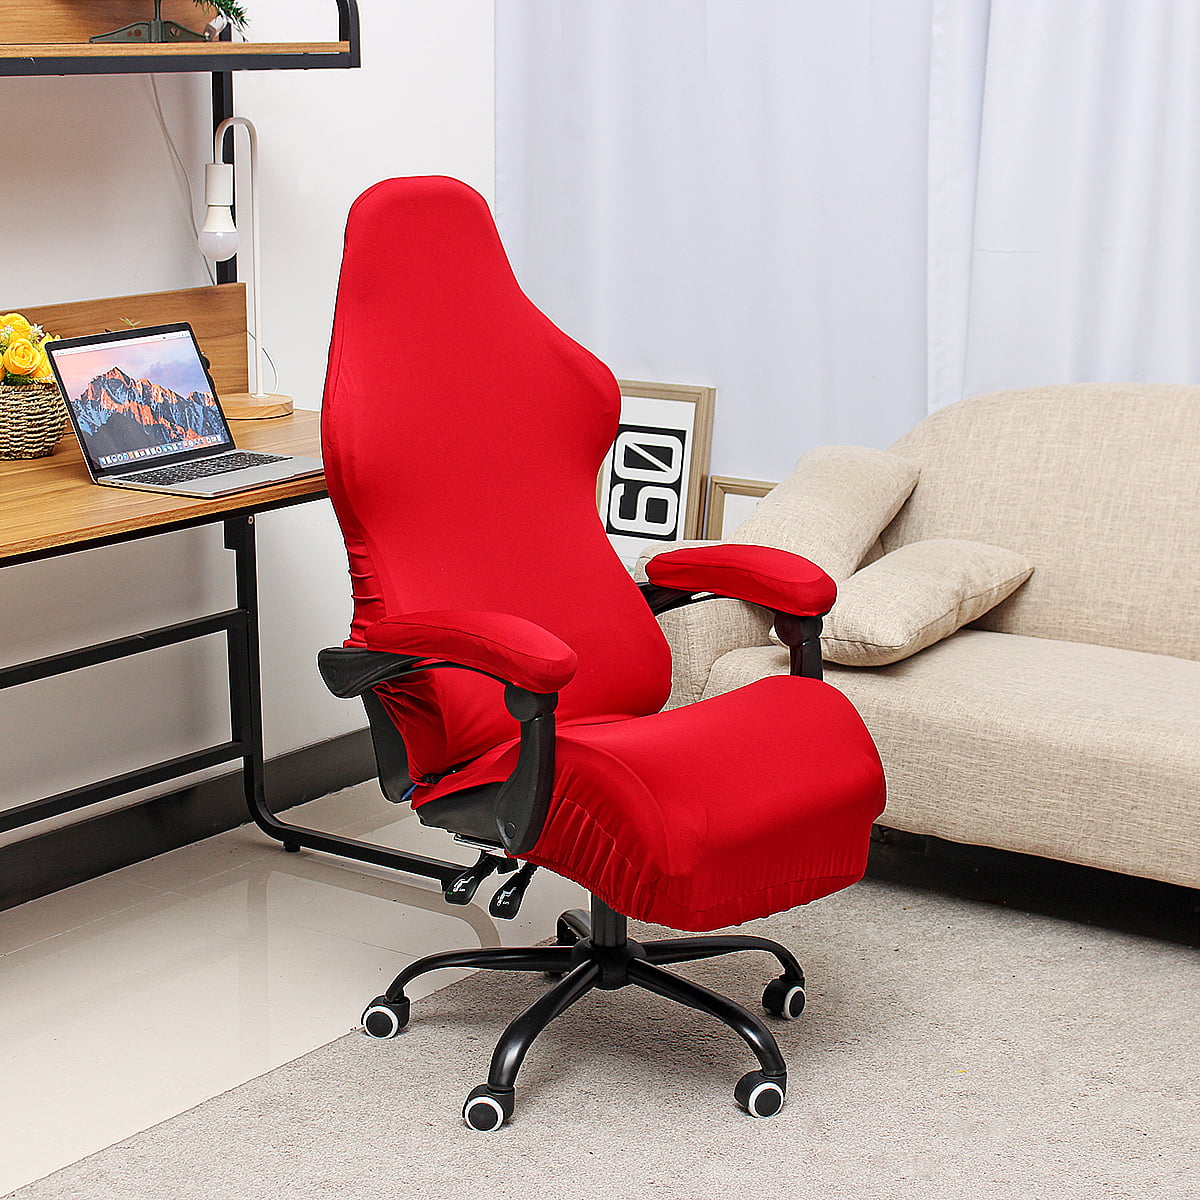 Stretch Spandex Comfortable Soft Chair Cover Computer Office Desk Slipcovers 